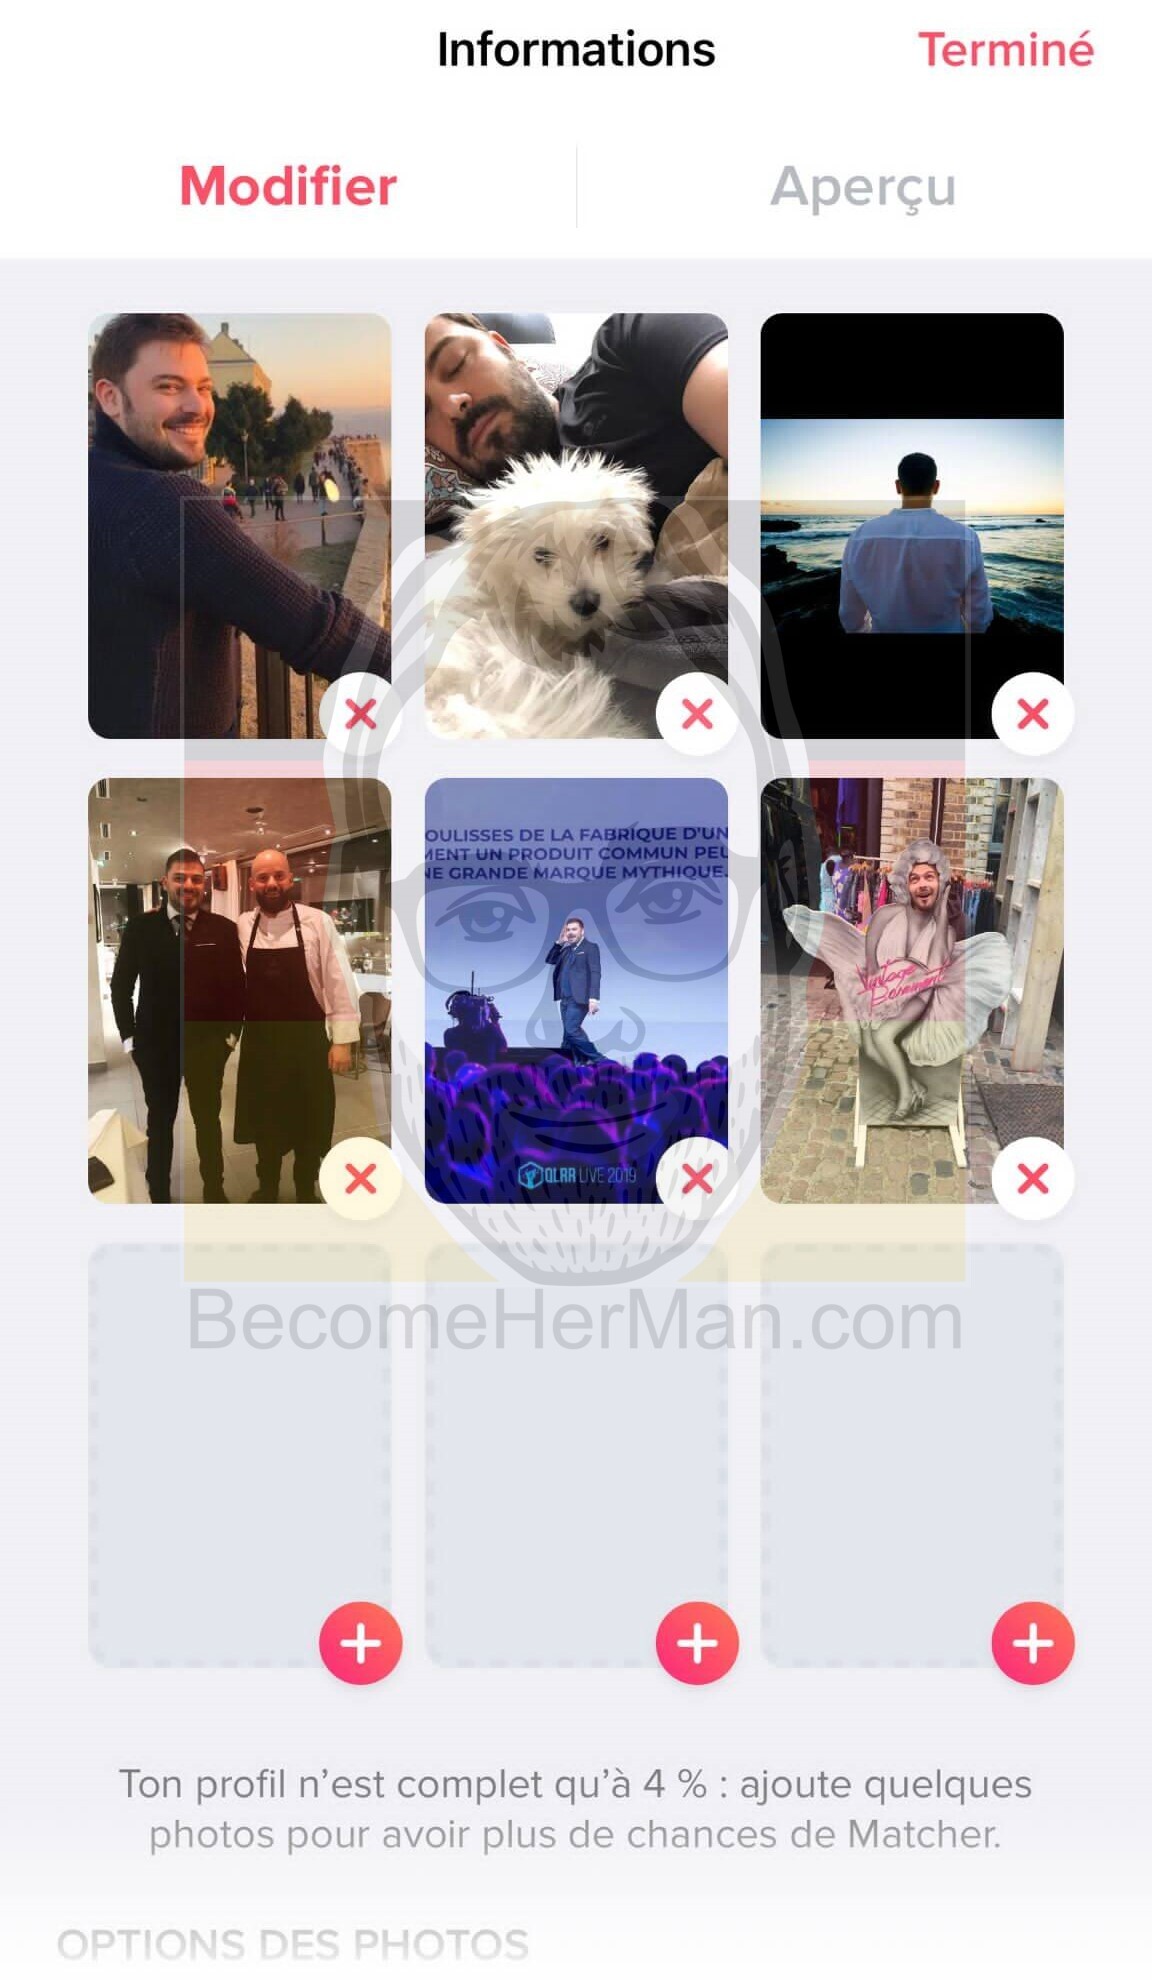 Tinder hacks to get more matches with your pictures